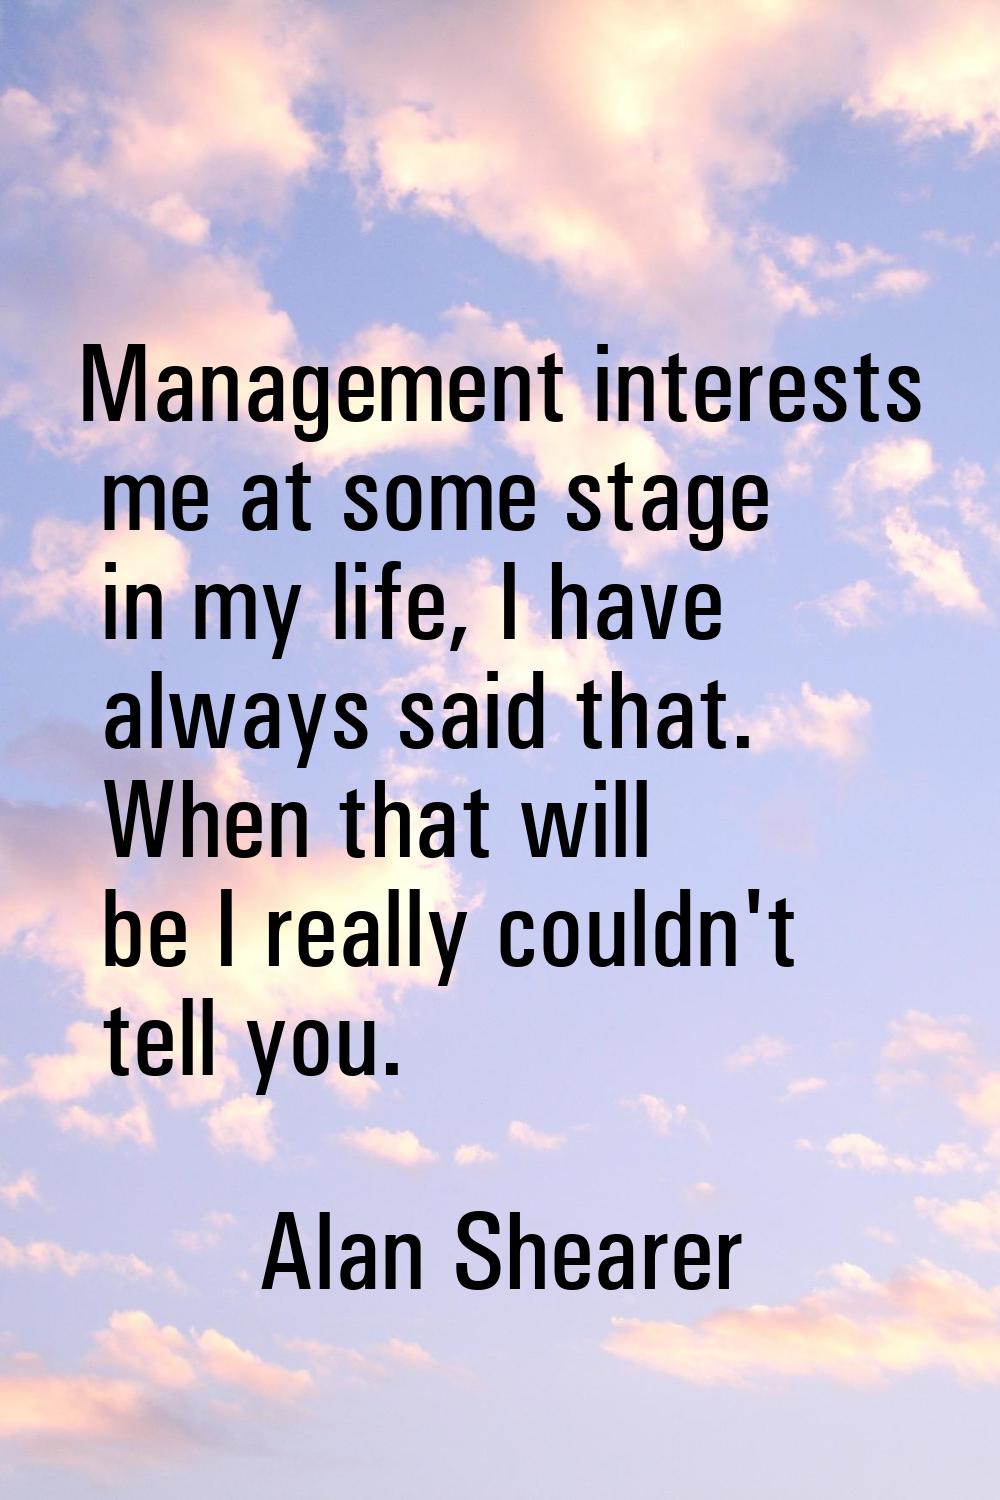 Management interests me at some stage in my life, I have always said that. When that will be I real